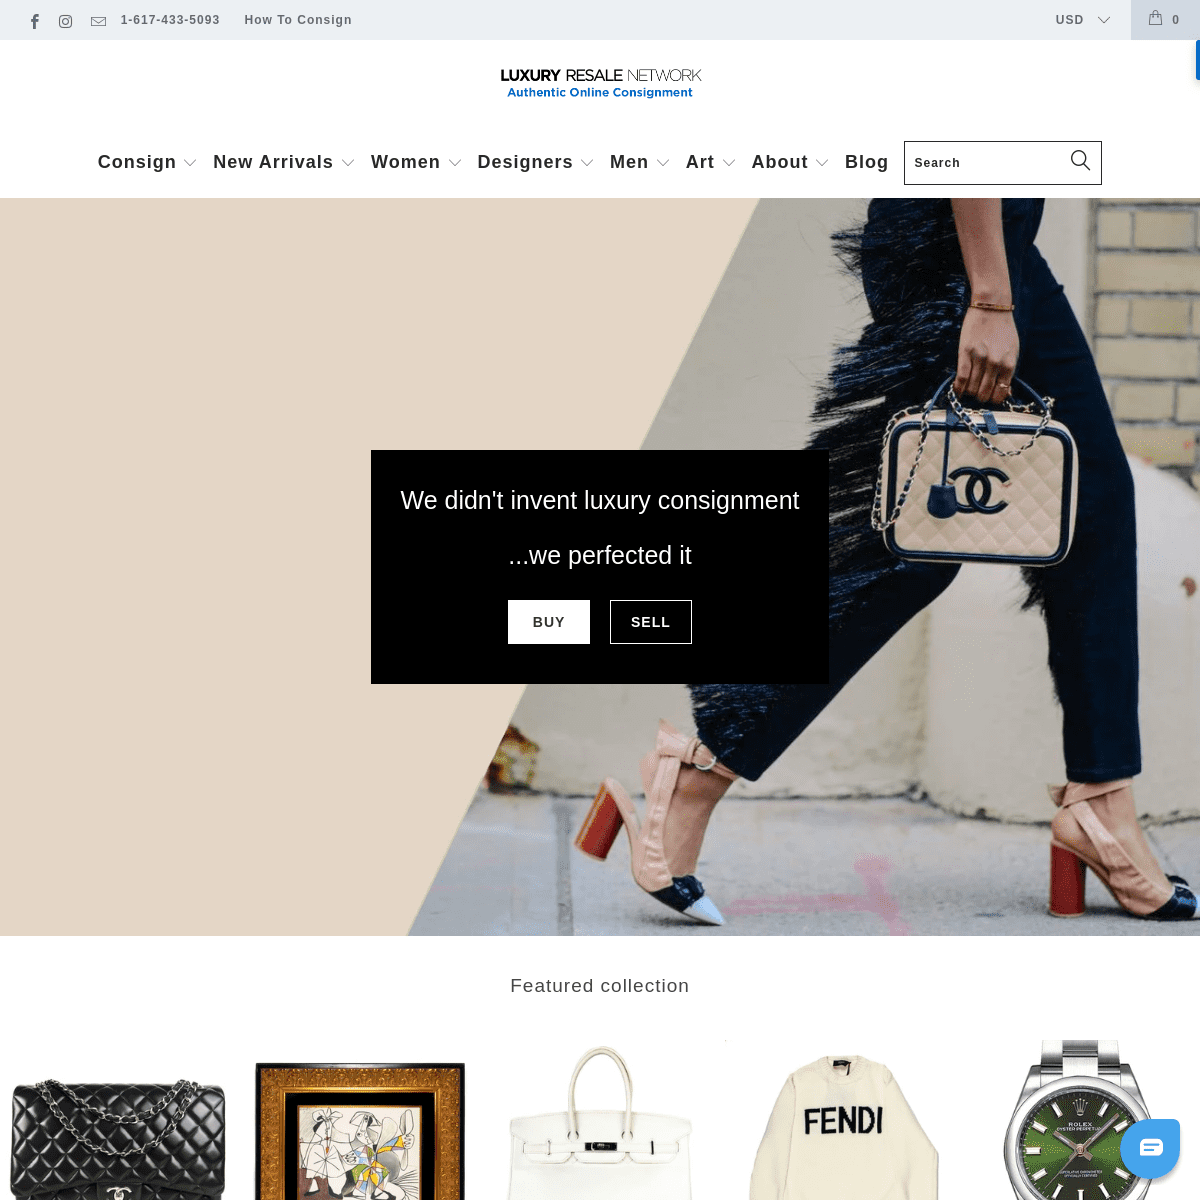 Luxury Resale Network - Online Consignment Store for Designer Brands